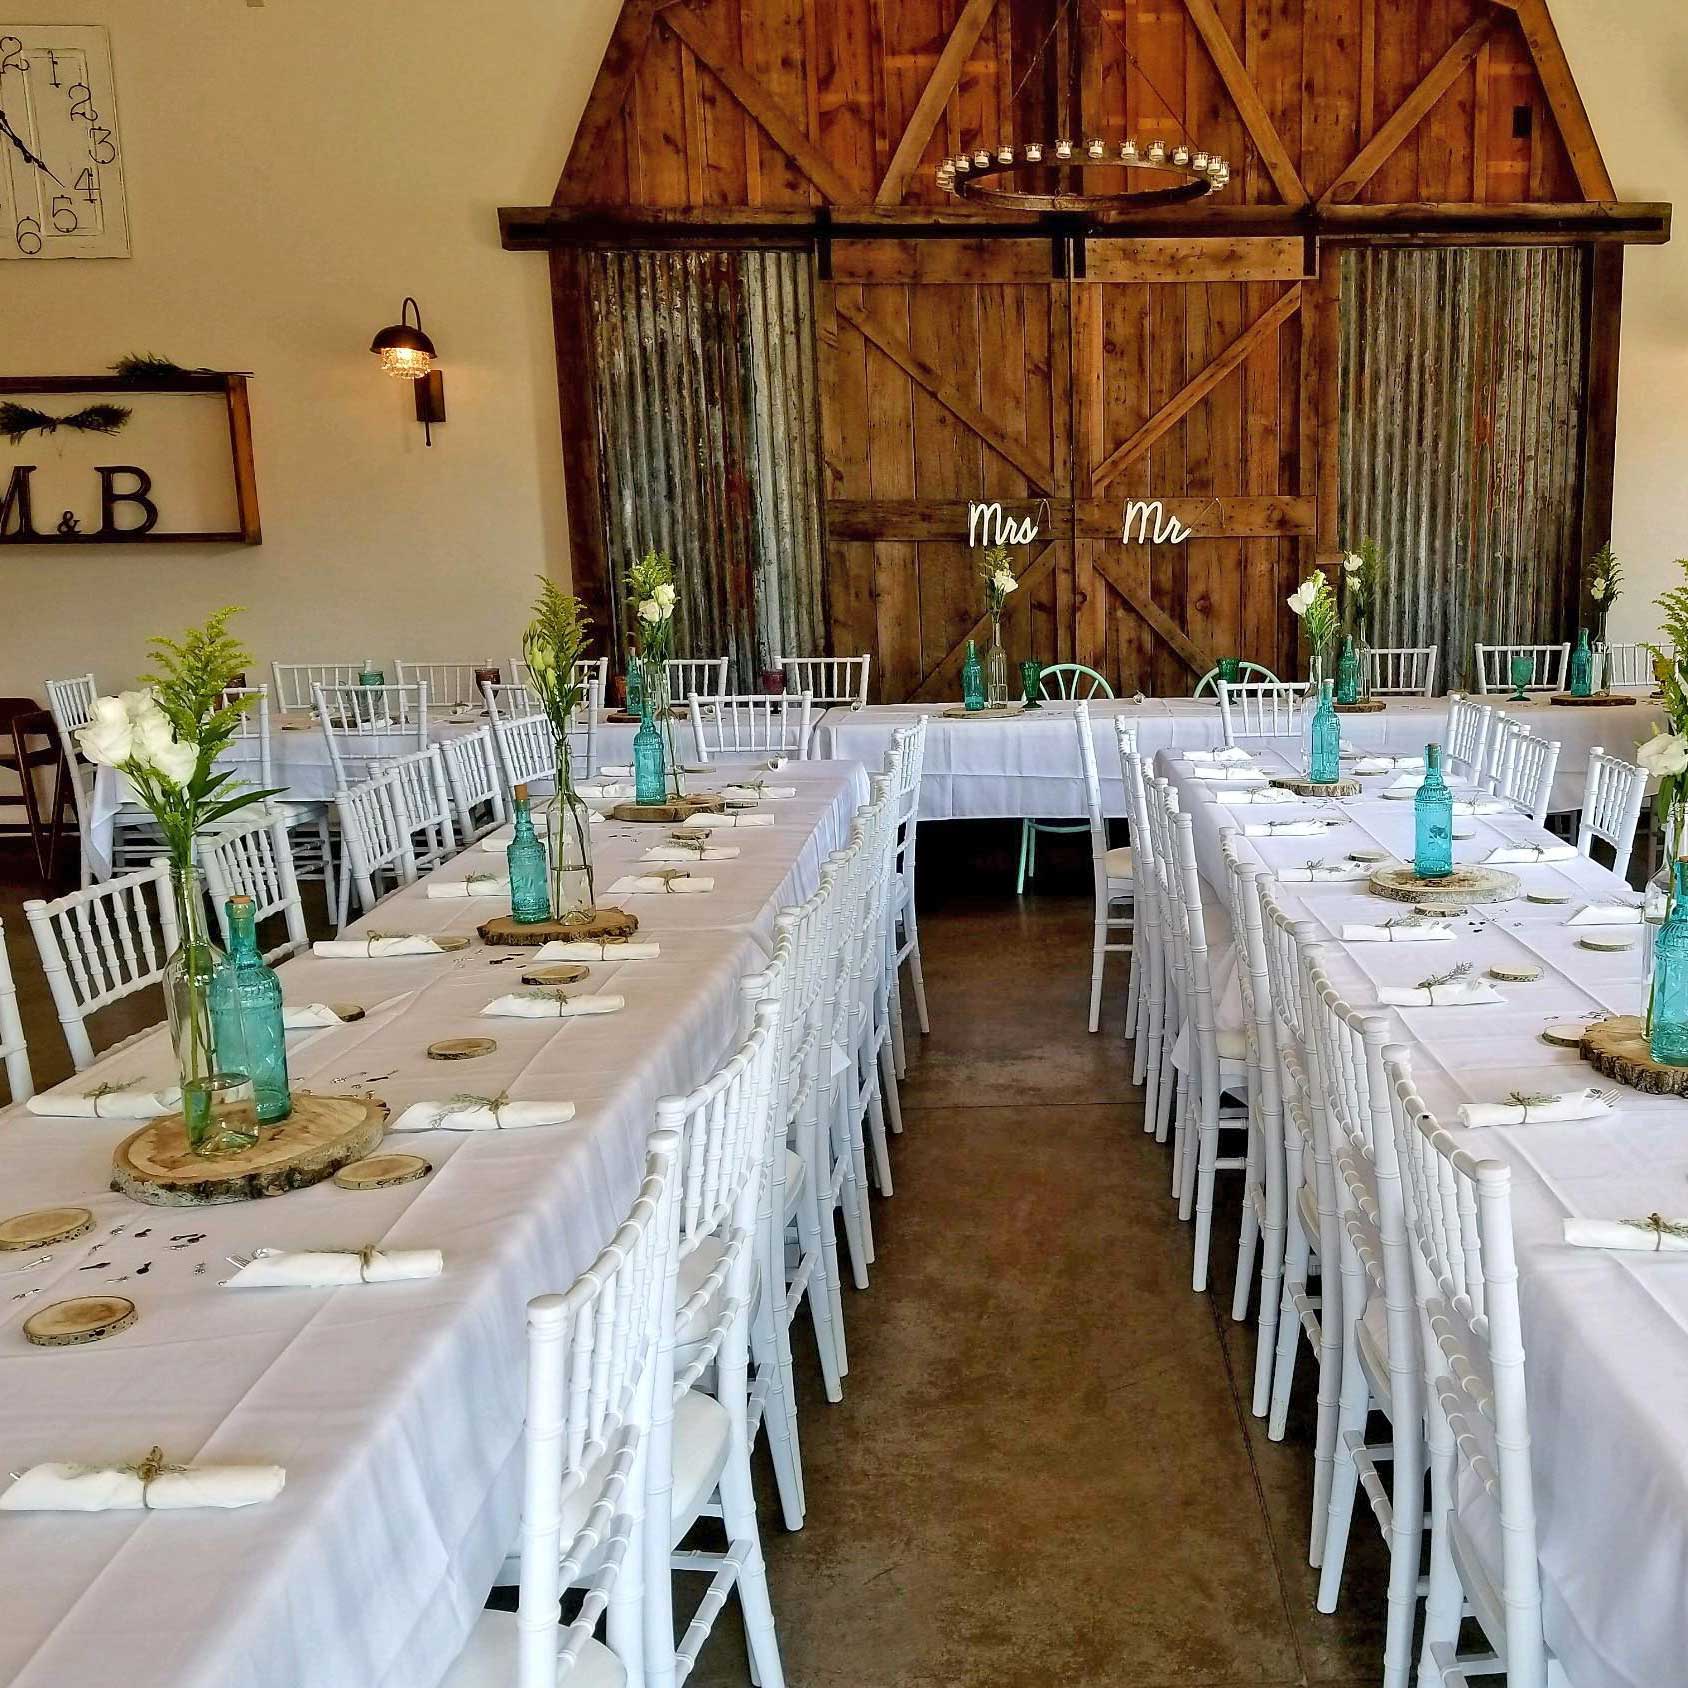 Barn in Big Horn - Wedding Receptions, Party and Event ...
 Big Horn Resort Wedding